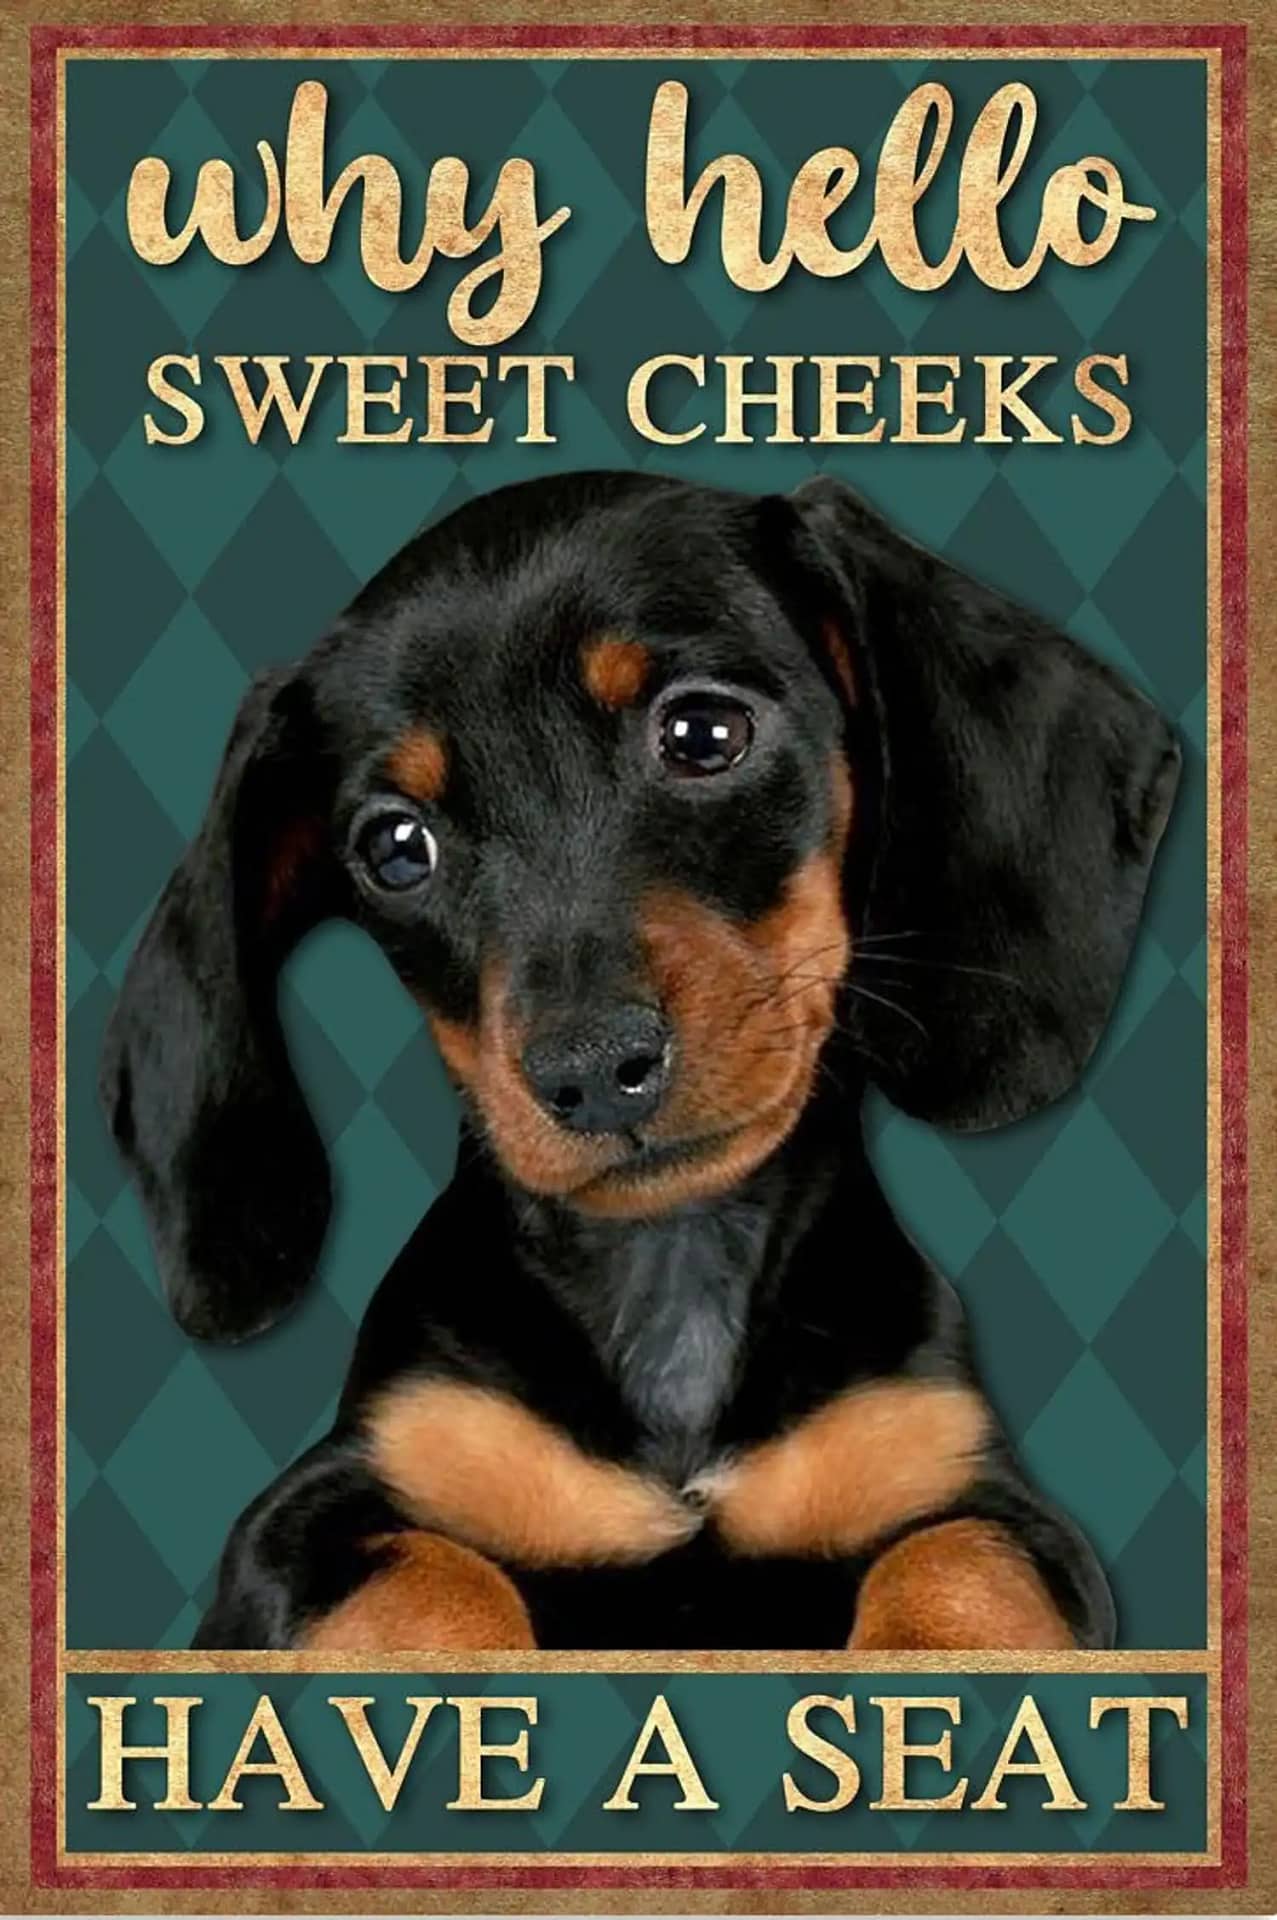 Dachshund Why Hello Sweet Cheeks Have A Seat Poster